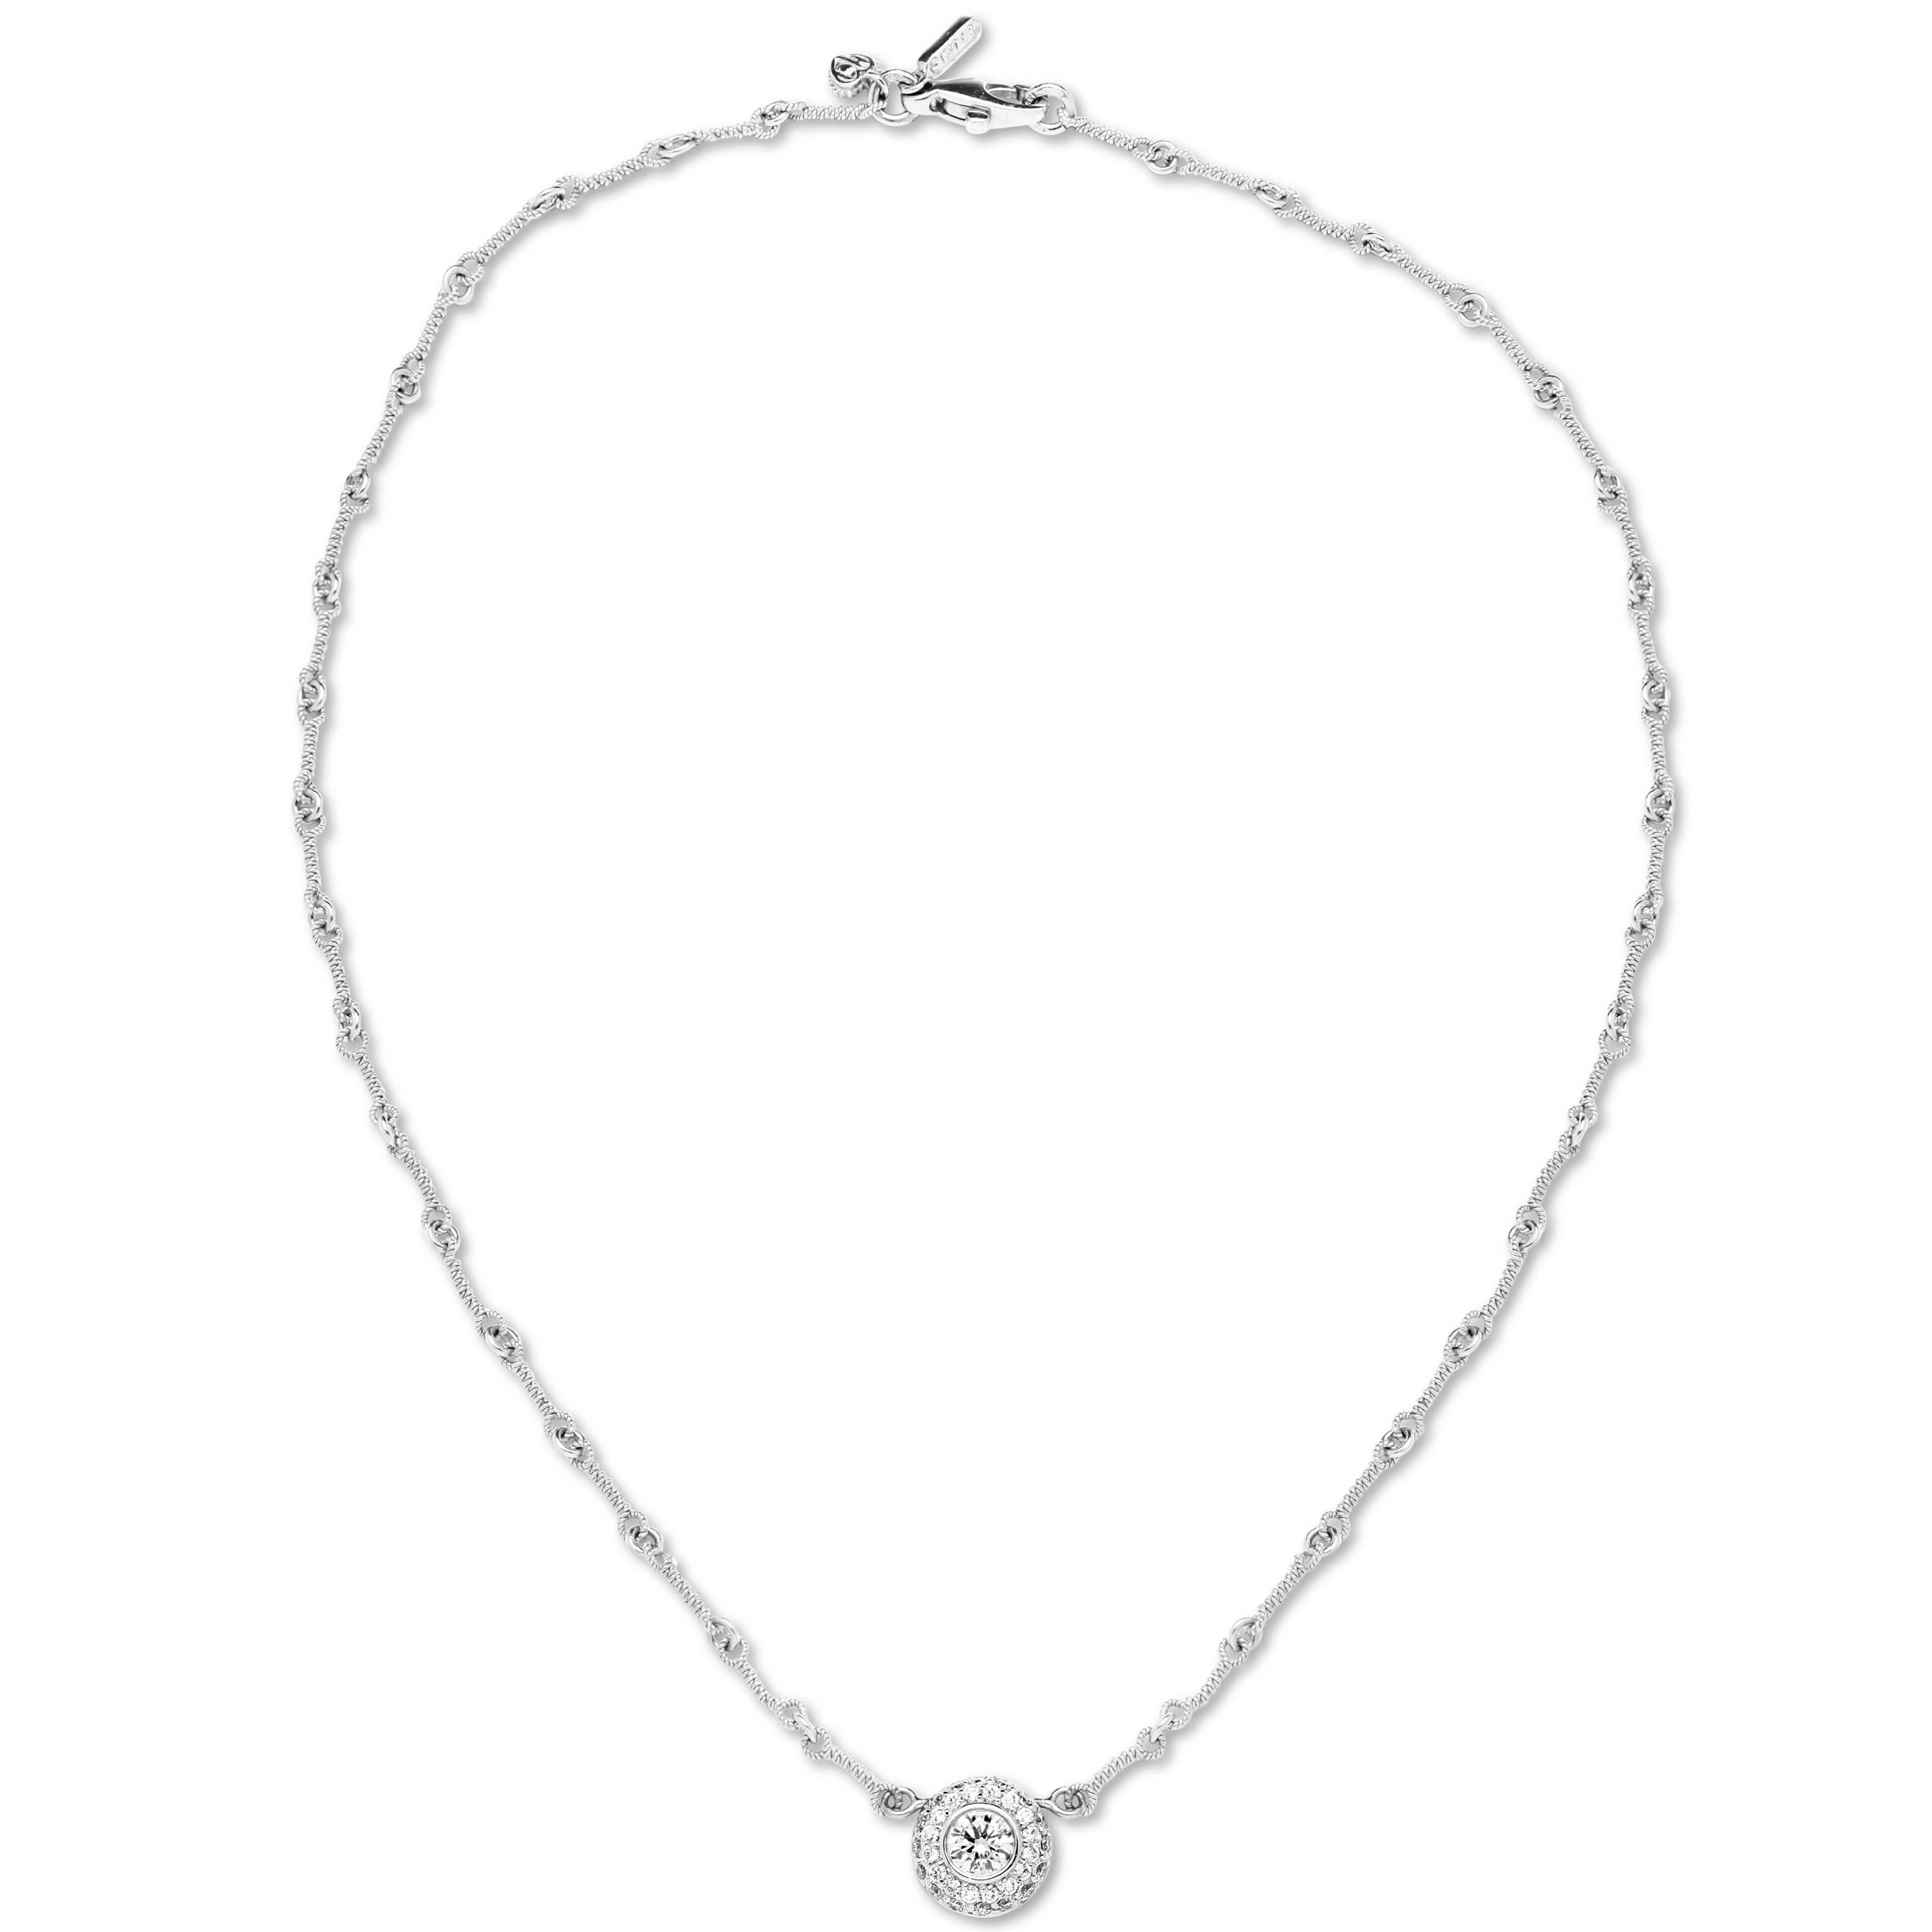 IF YOU ARE REALLY INTERESTED, CONTACT US WITH ANY REASONABLE OFFER. WE WILL TRY OUR BEST TO MAKE YOU HAPPY!

18K White Gold and Diamond Round Pendant Chain Necklace

Handmade chain is used which is done entirely by gold twisted wires all put